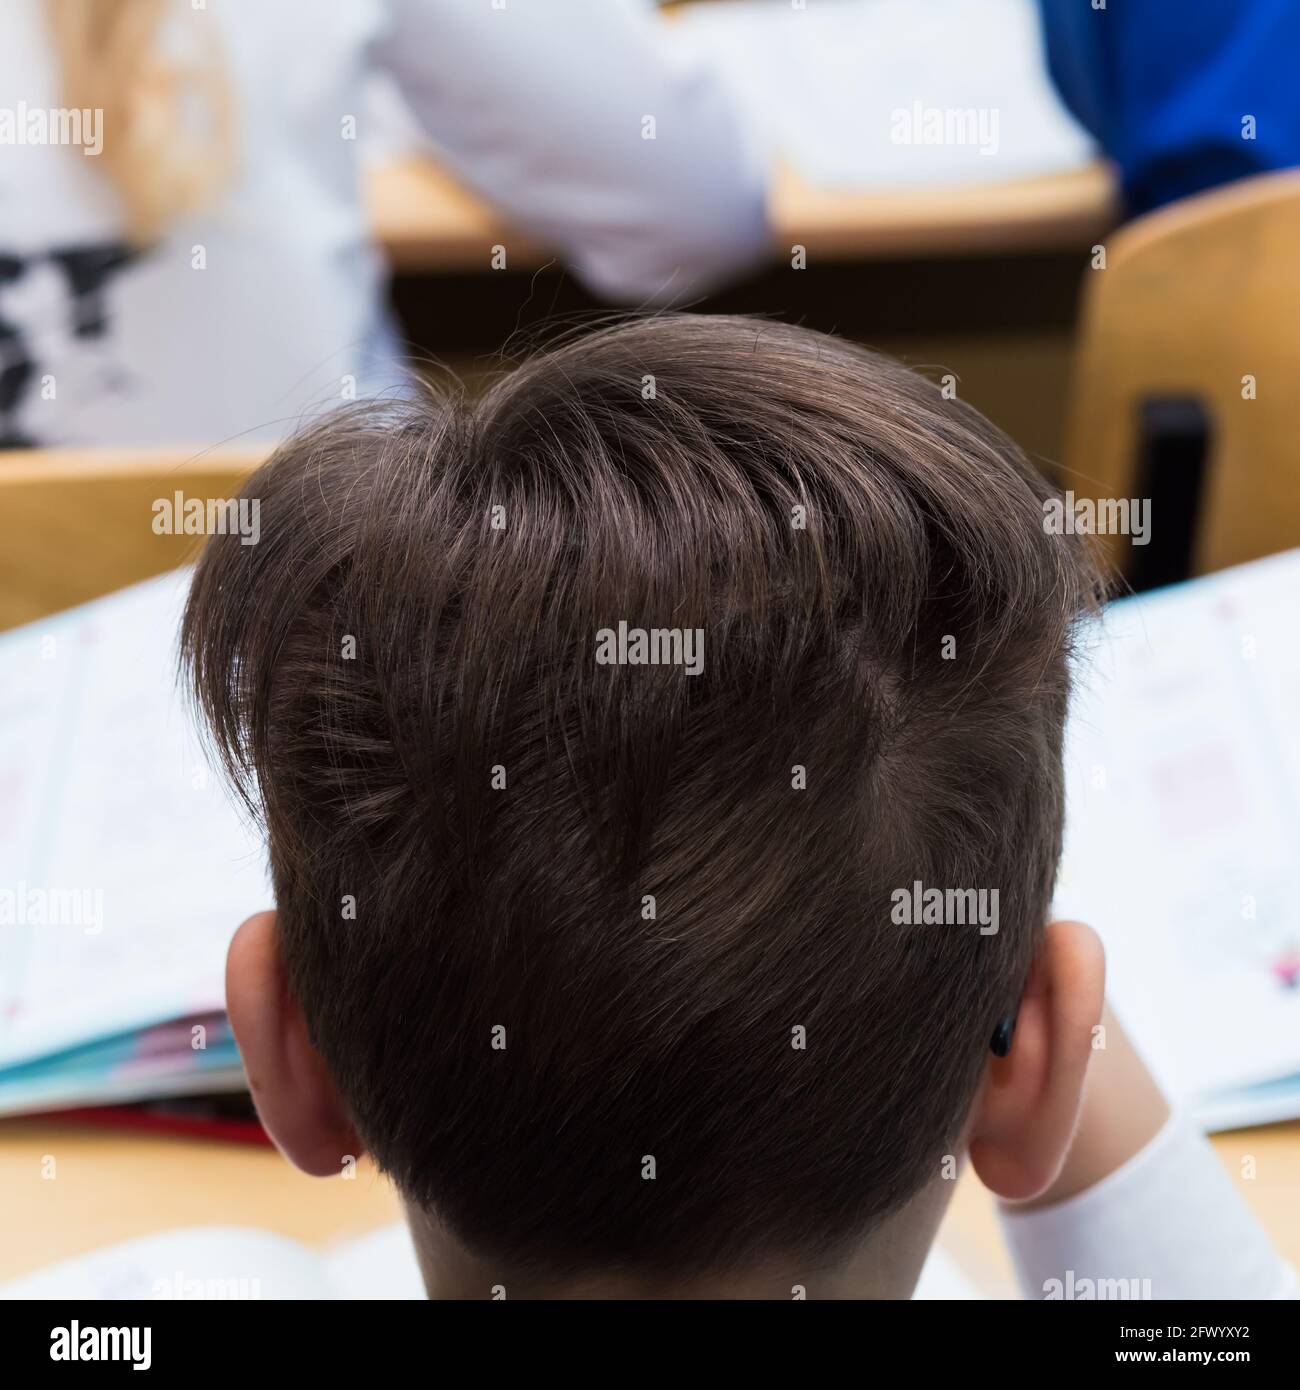 The back of the head of a boy with lush hair on the crown. Close-up of a  hairstyle on a child's head. Back view of the hairstyle of a man with a